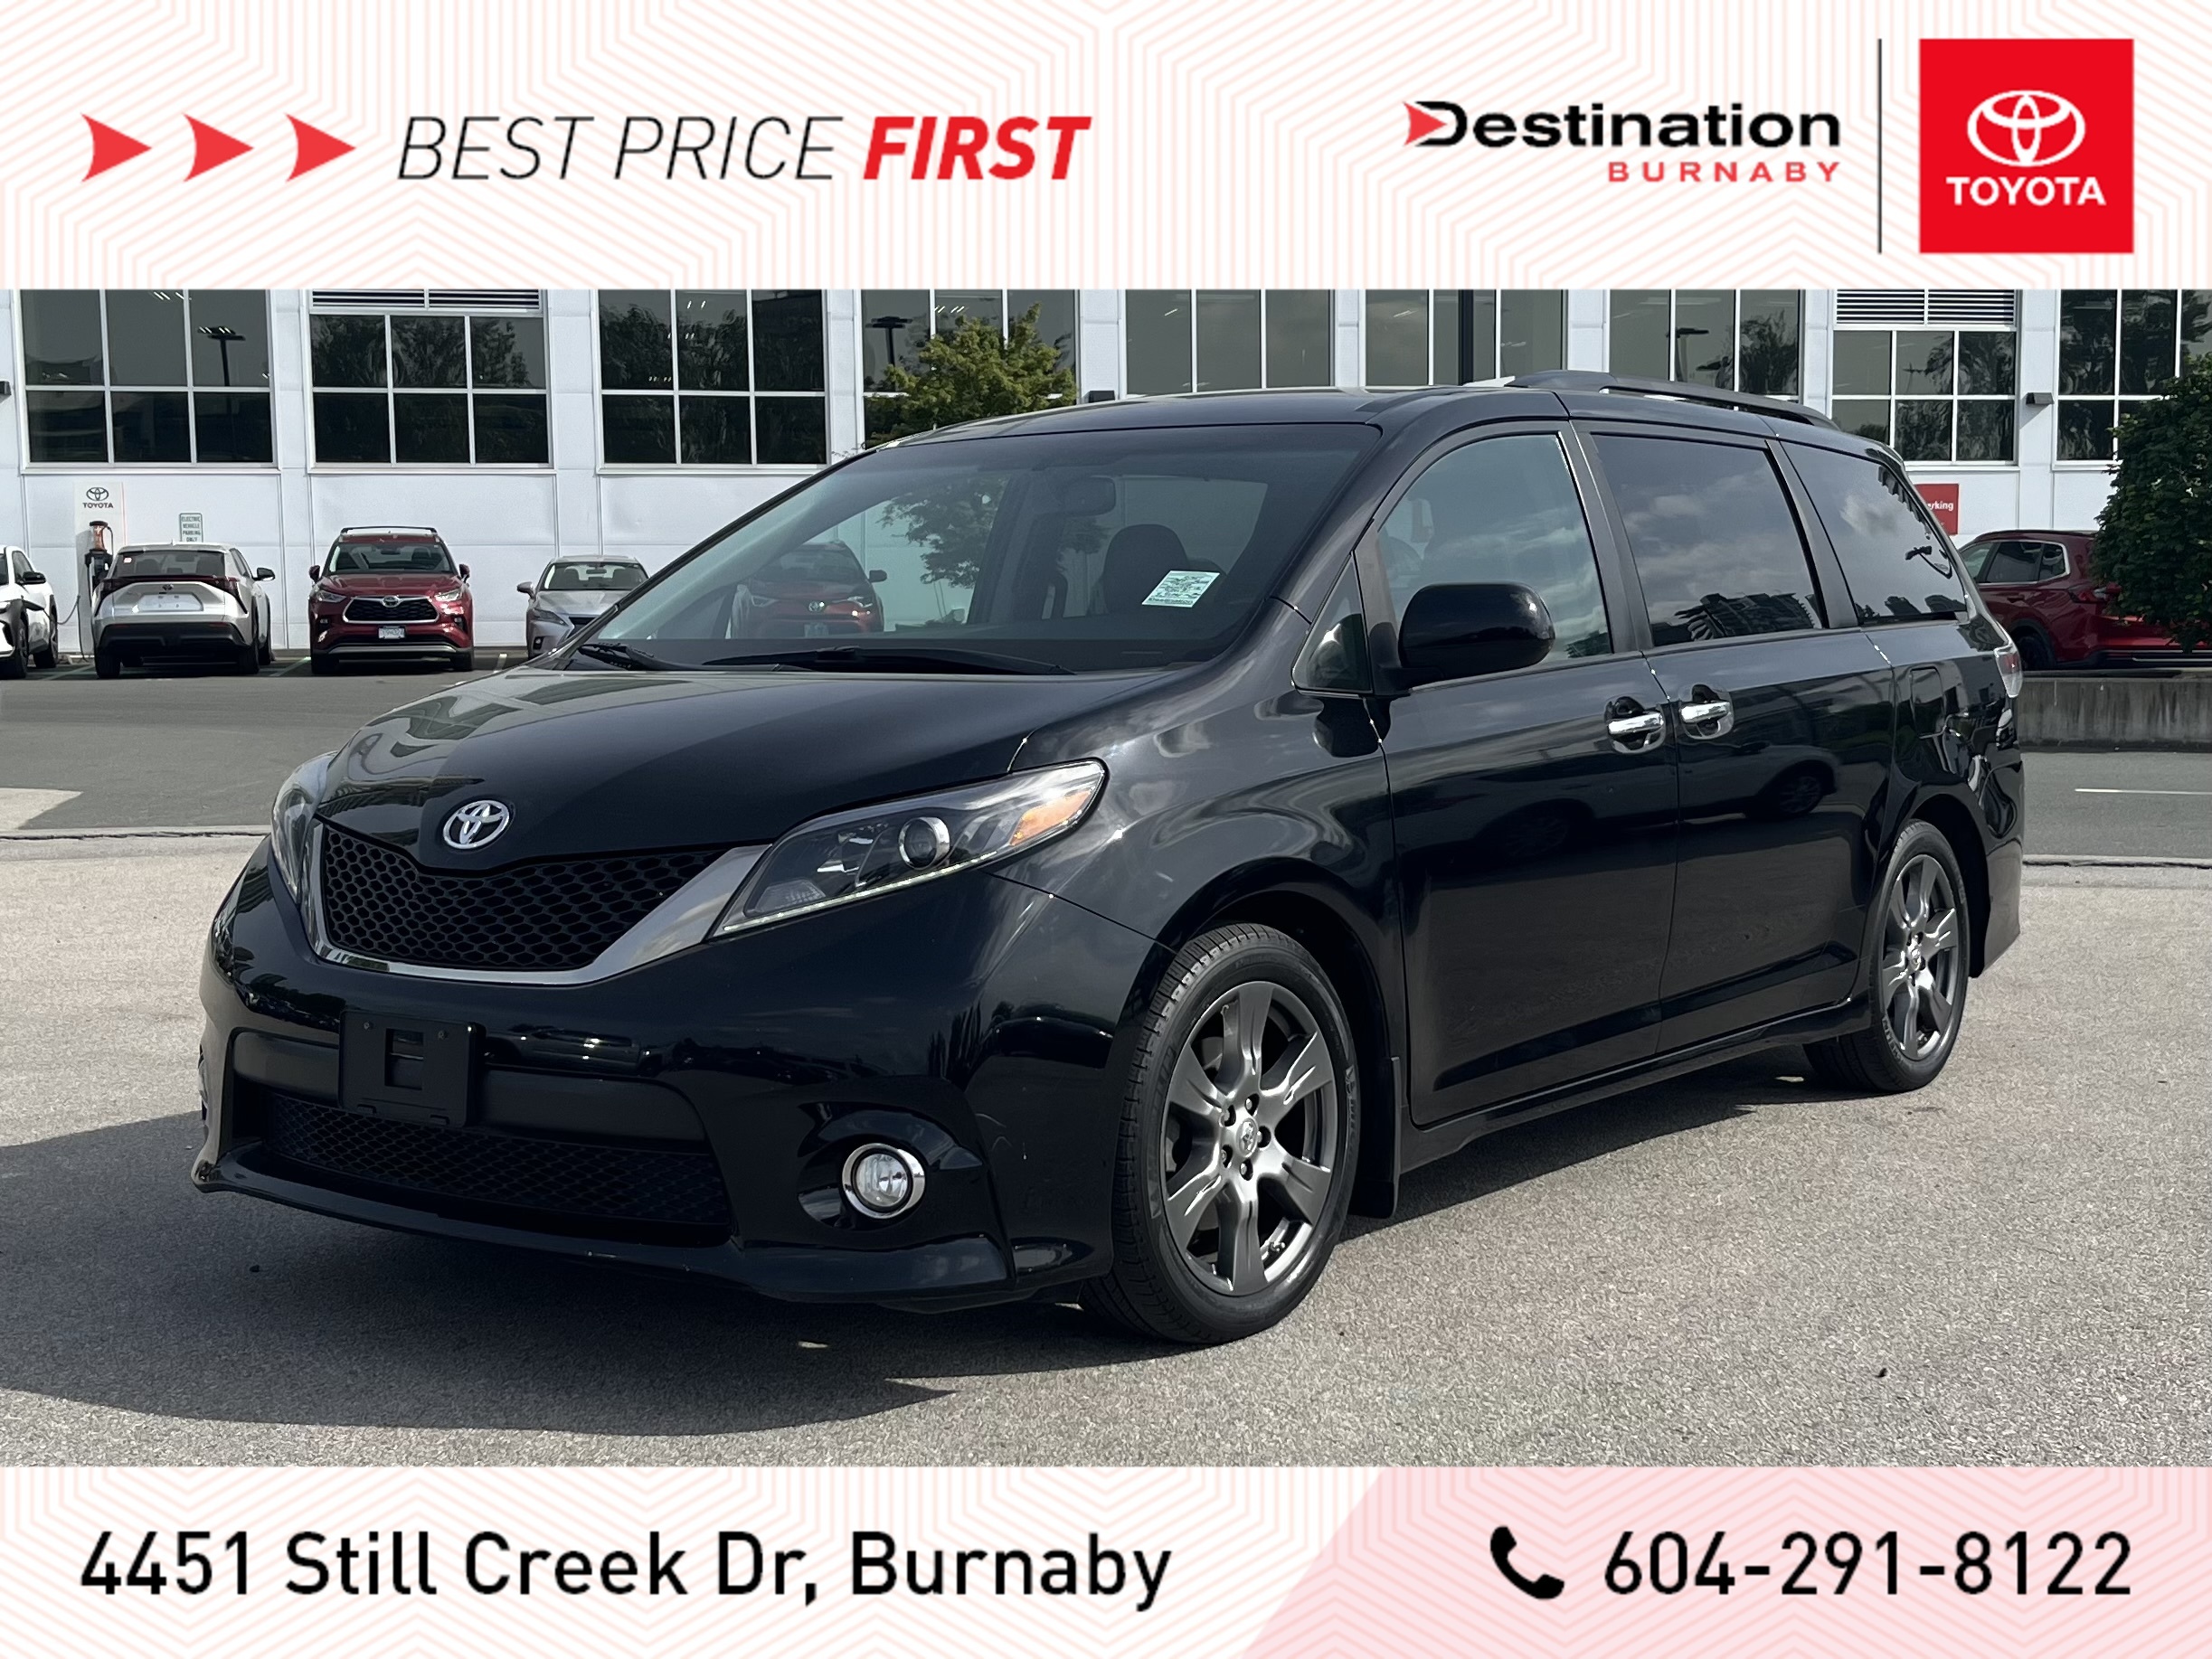 2017 Toyota Sienna SE V6 8-Pass, One owner, Low Kms